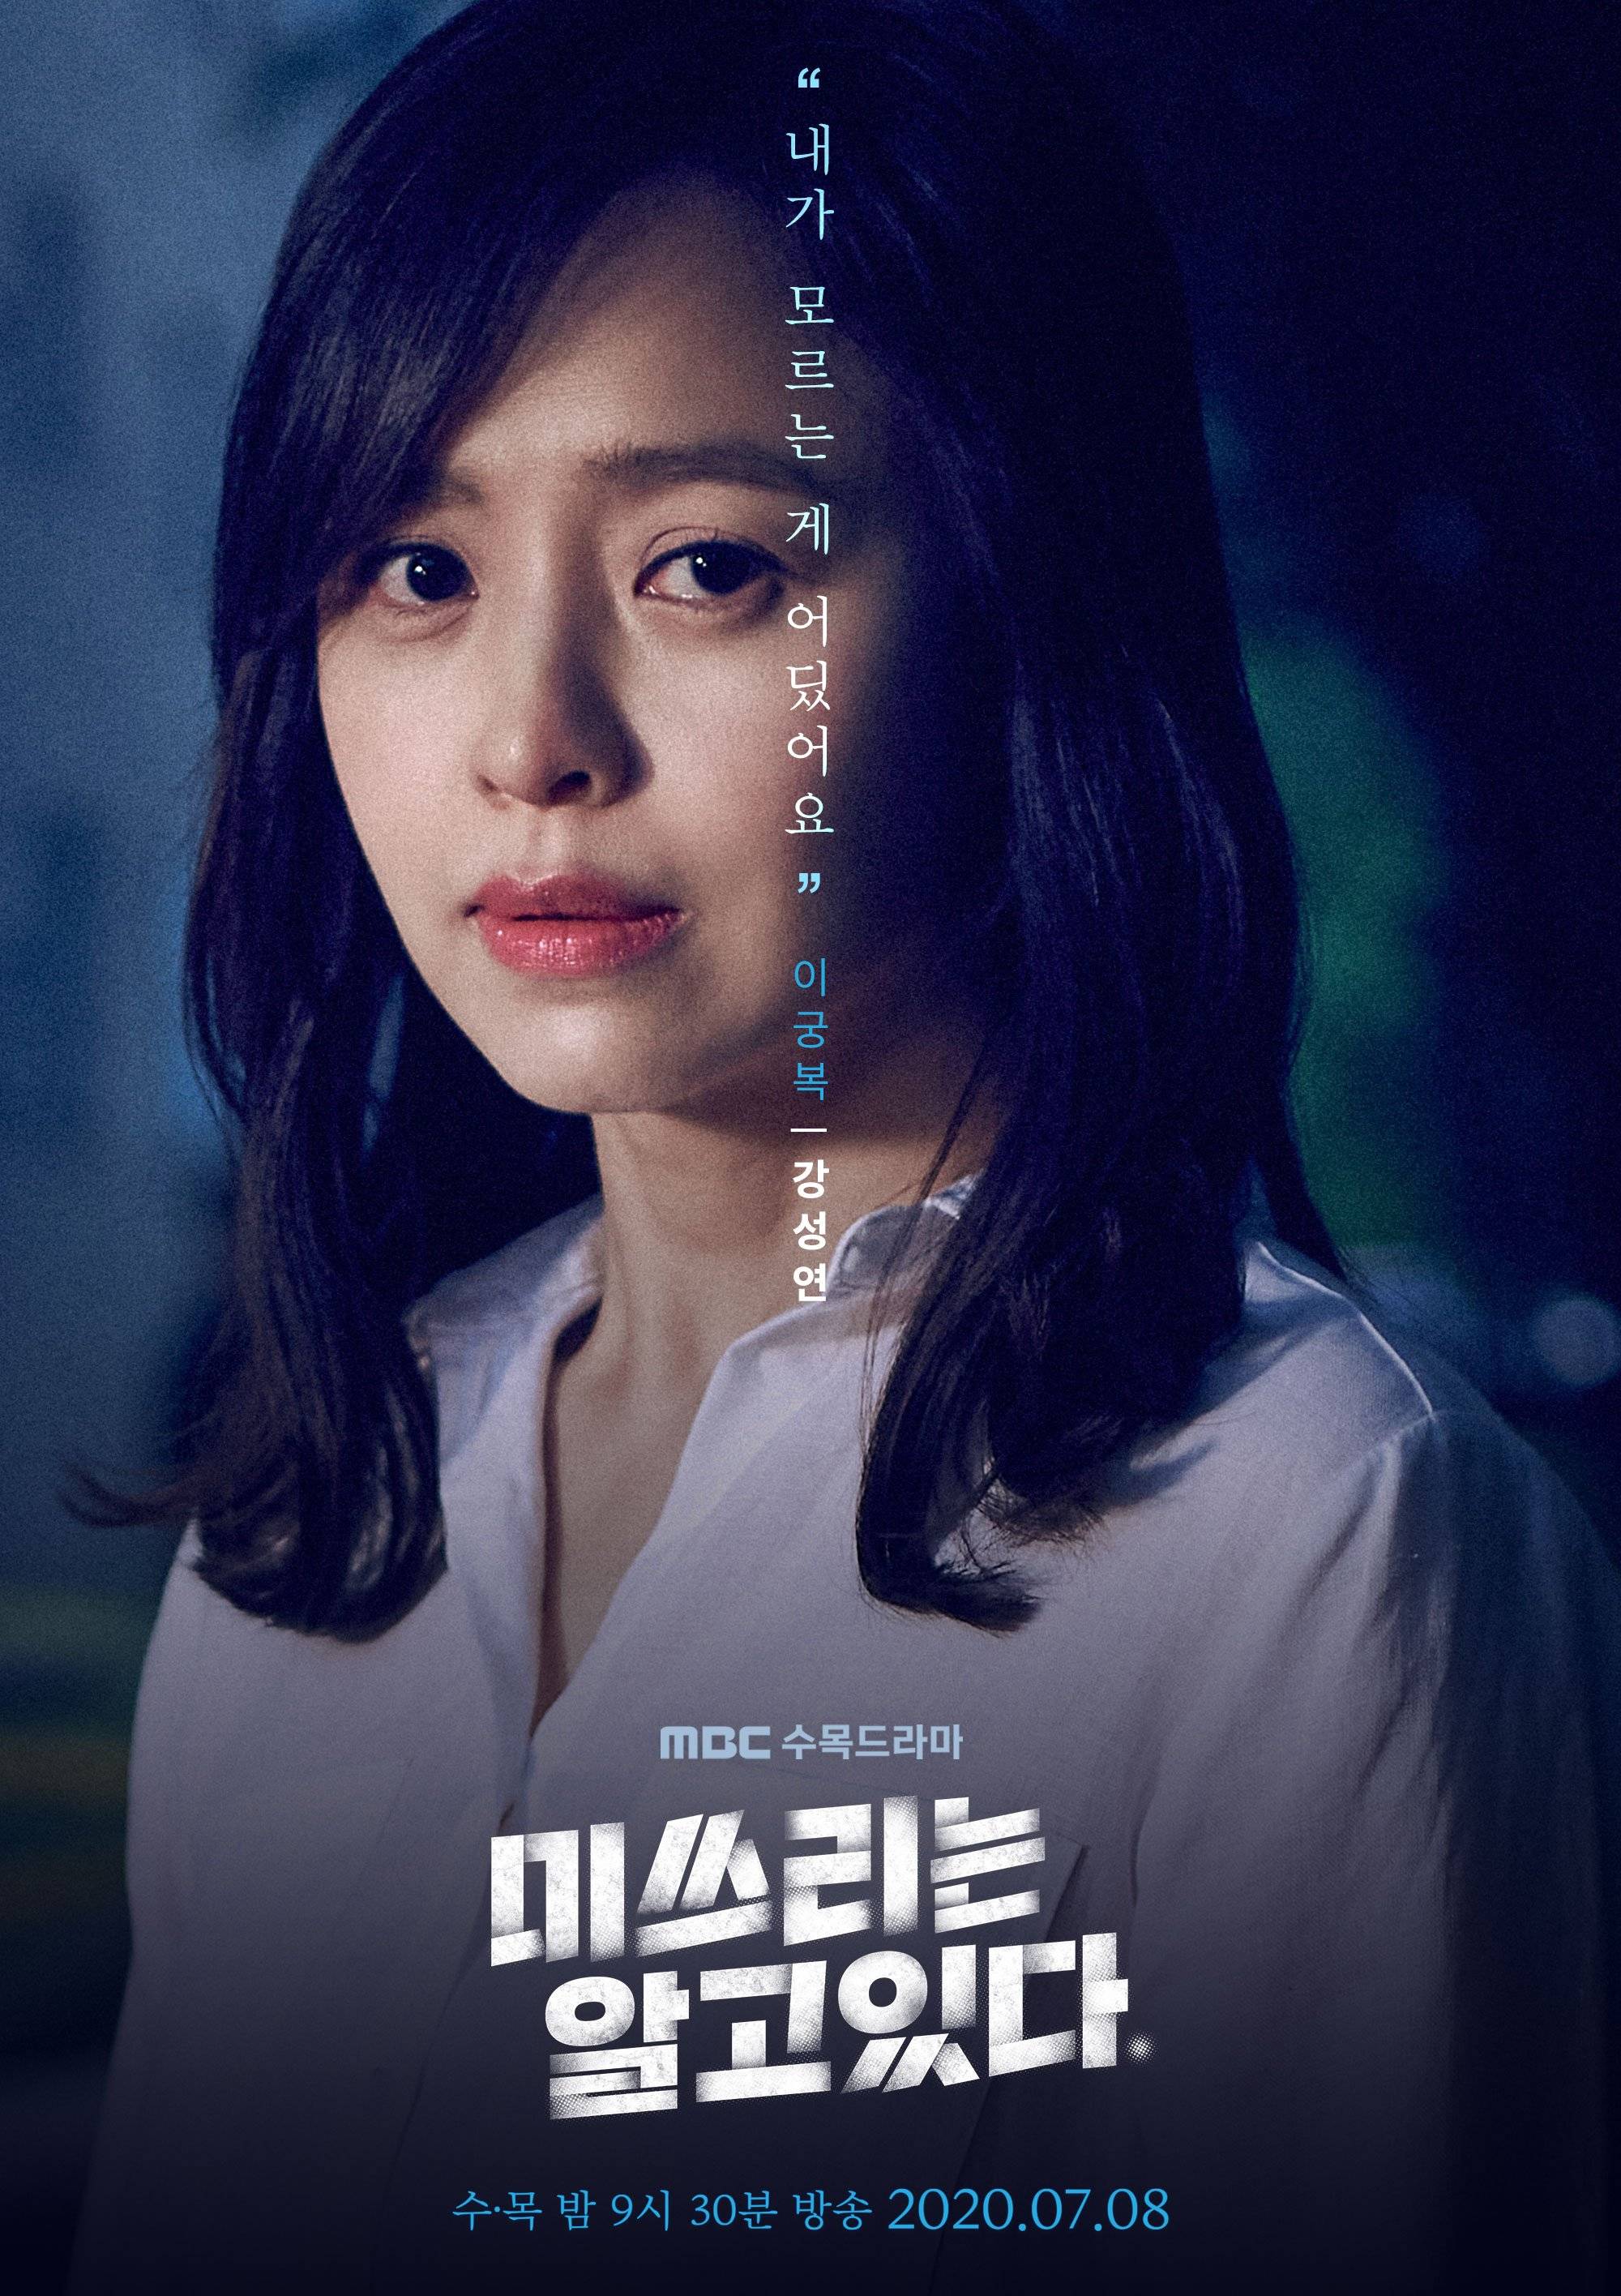 Photos] New Posters Added for the Upcoming Korean Drama "She Knows ...